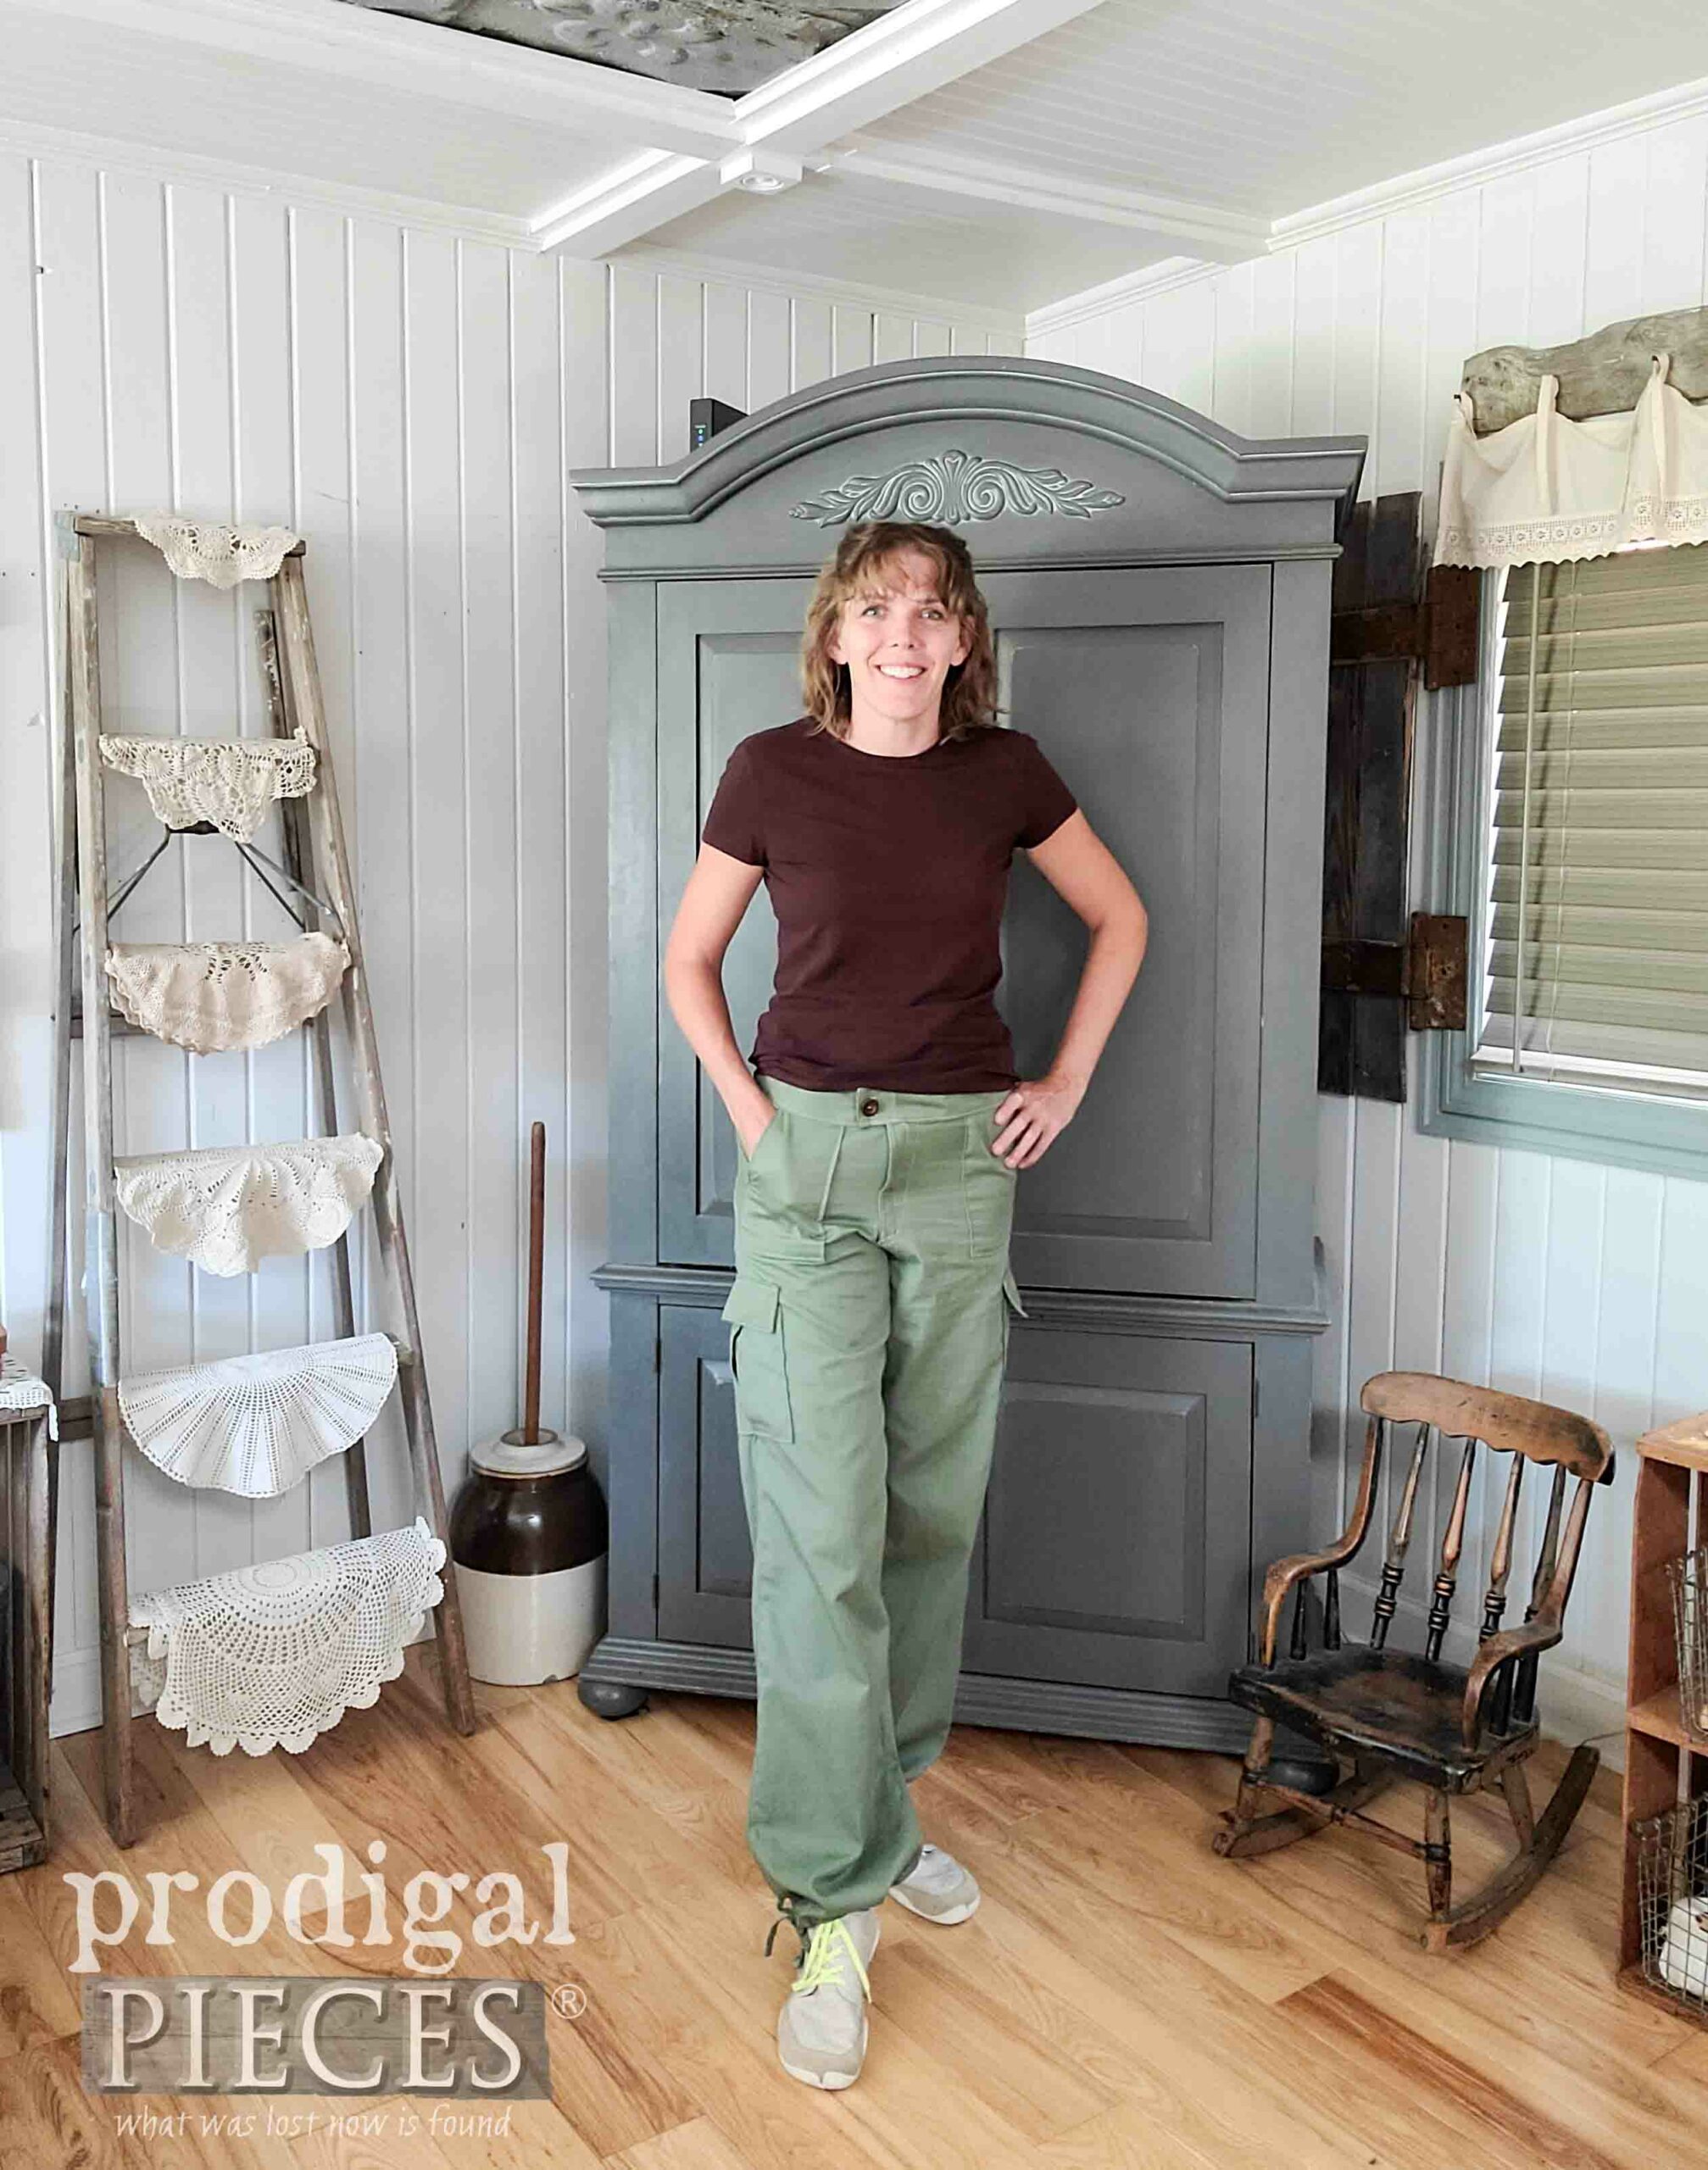 Finished Upcycled Curtains turned DIY Cargo Pants by Larissa of Prodigal Pieces | prodigalpieces.com #prodigalpieces